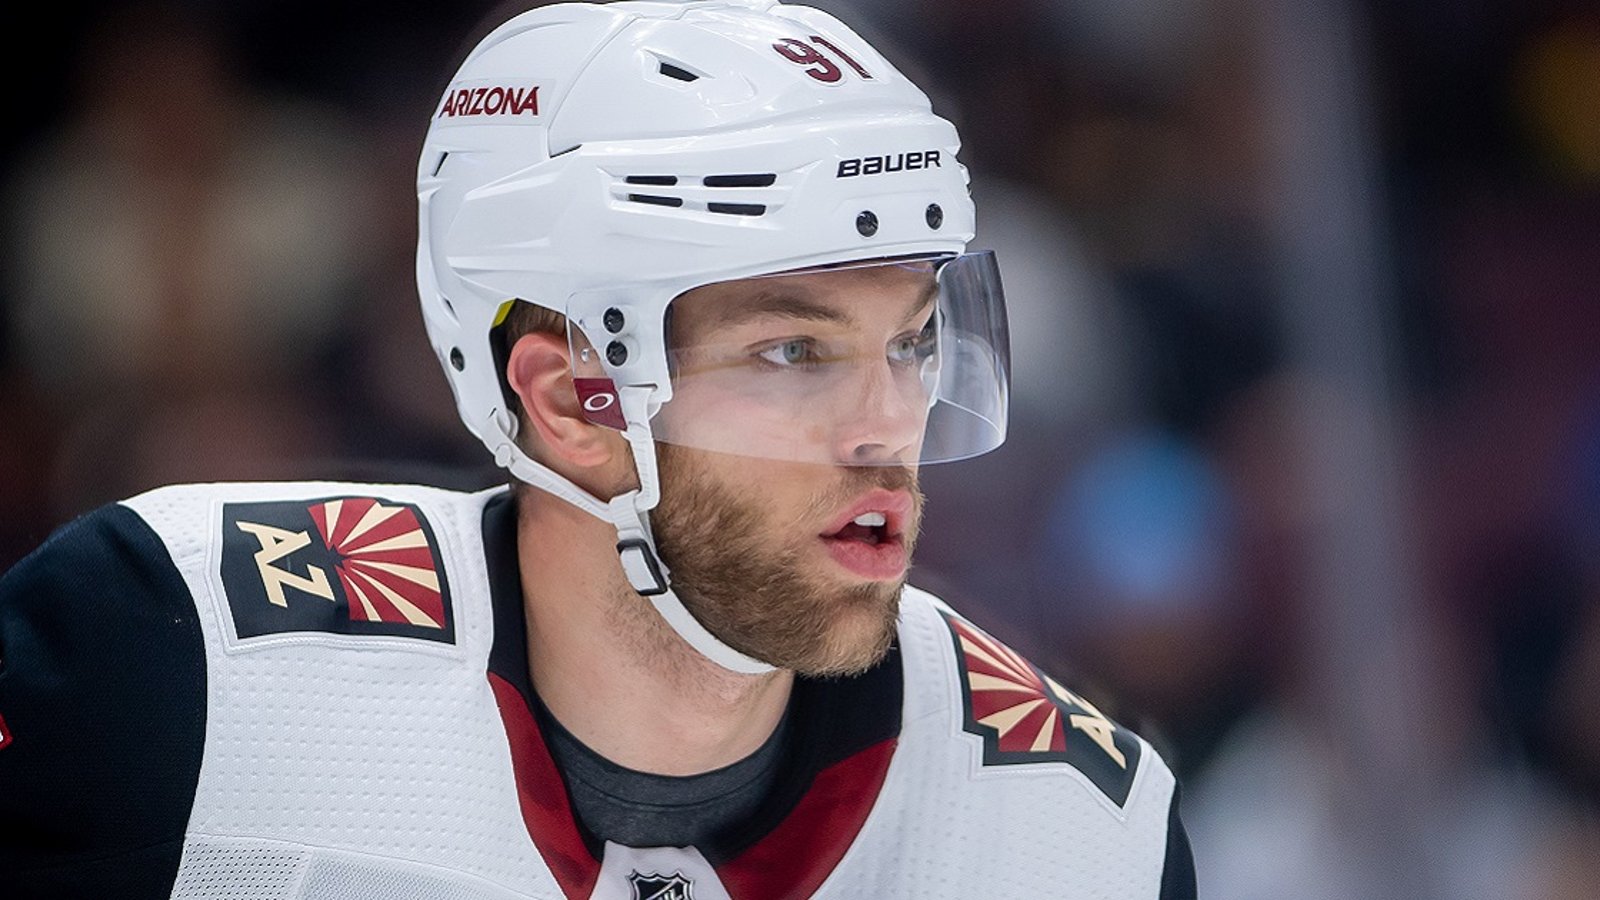 Rumor: Taylor Hall could be traded once again before the trade deadline.